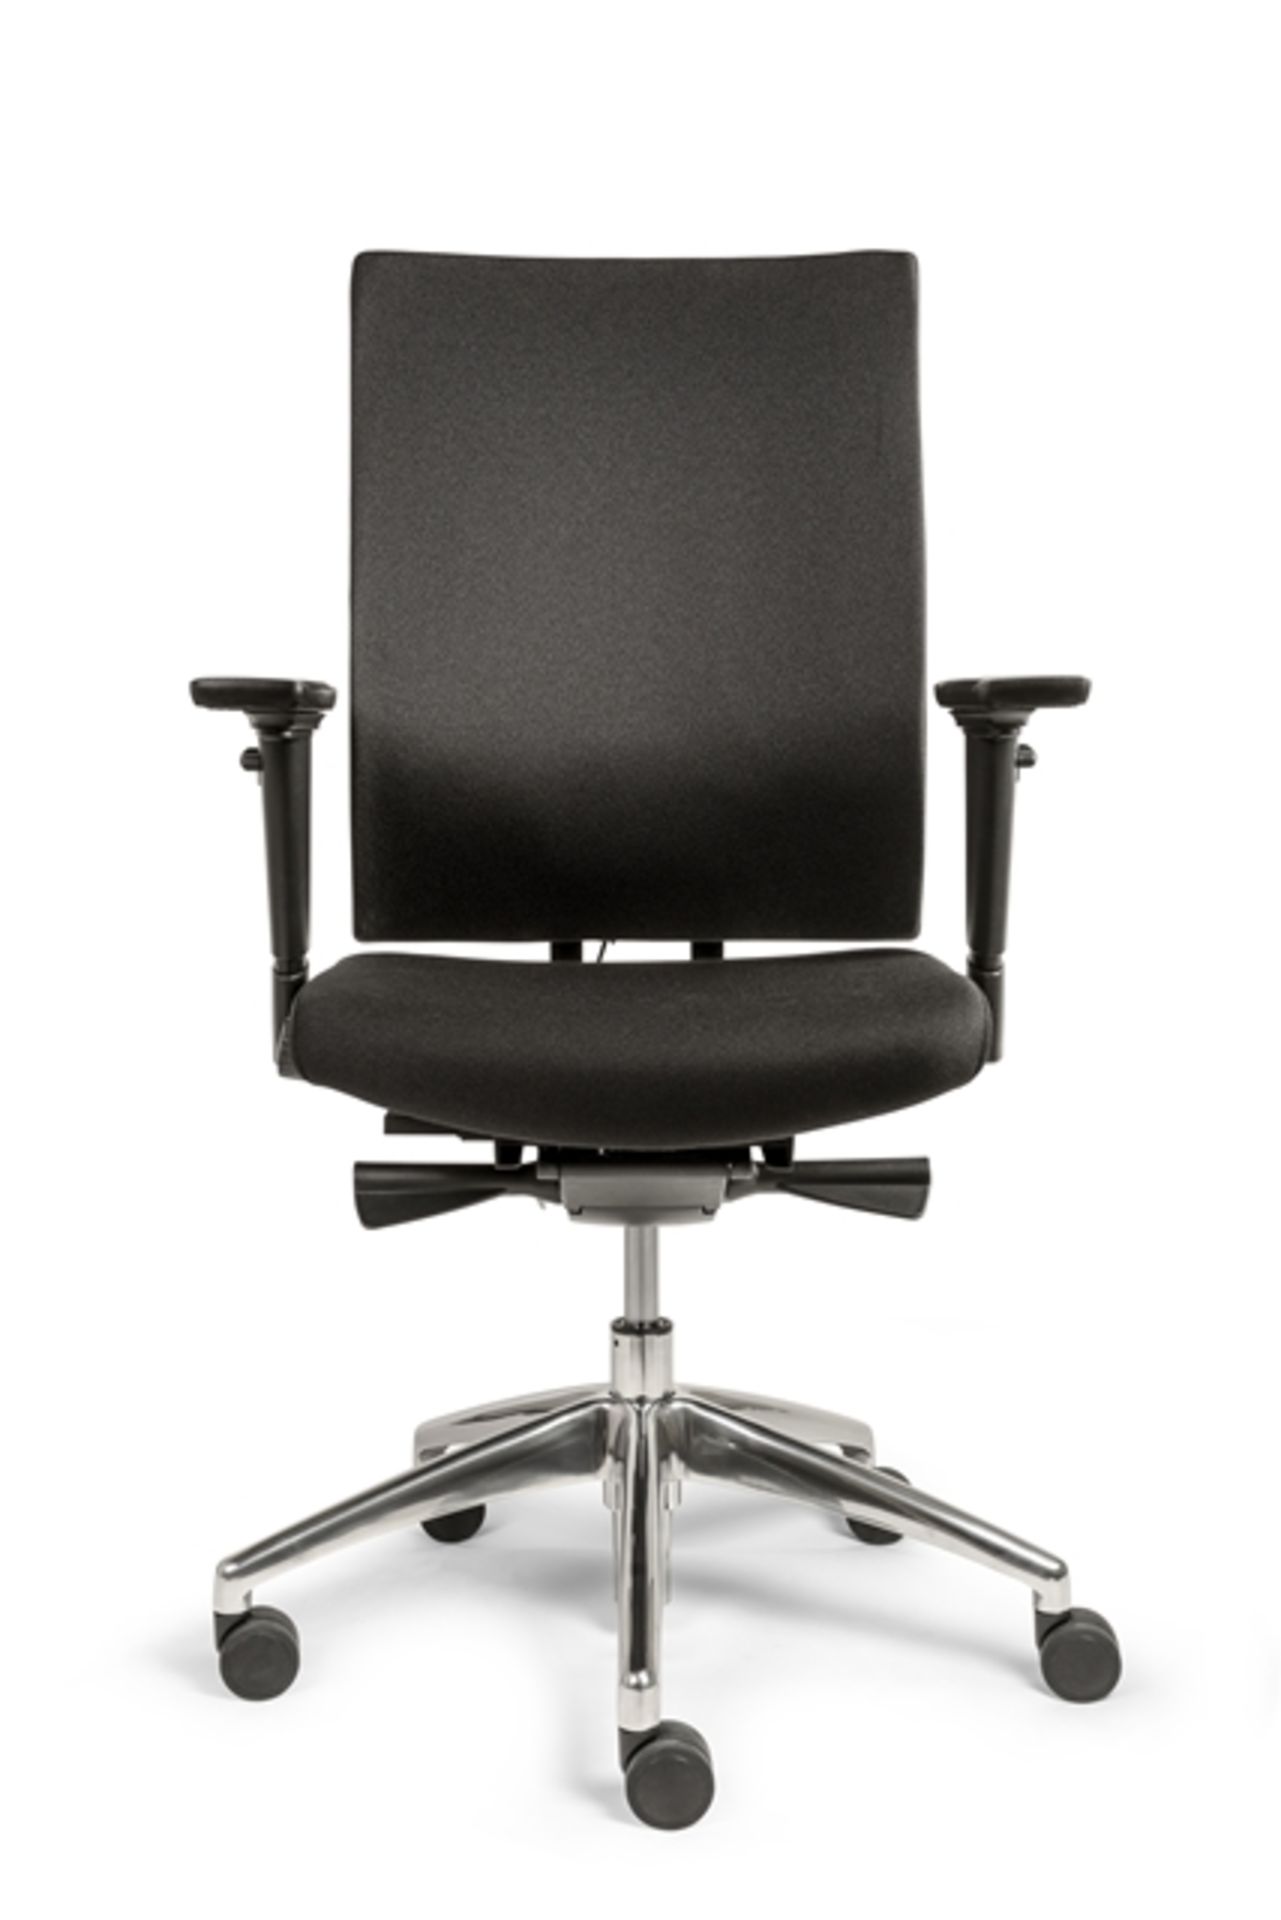 Unused ergonomic fully upholstered office chair in black (RRP £289) located in Stafford, viewing